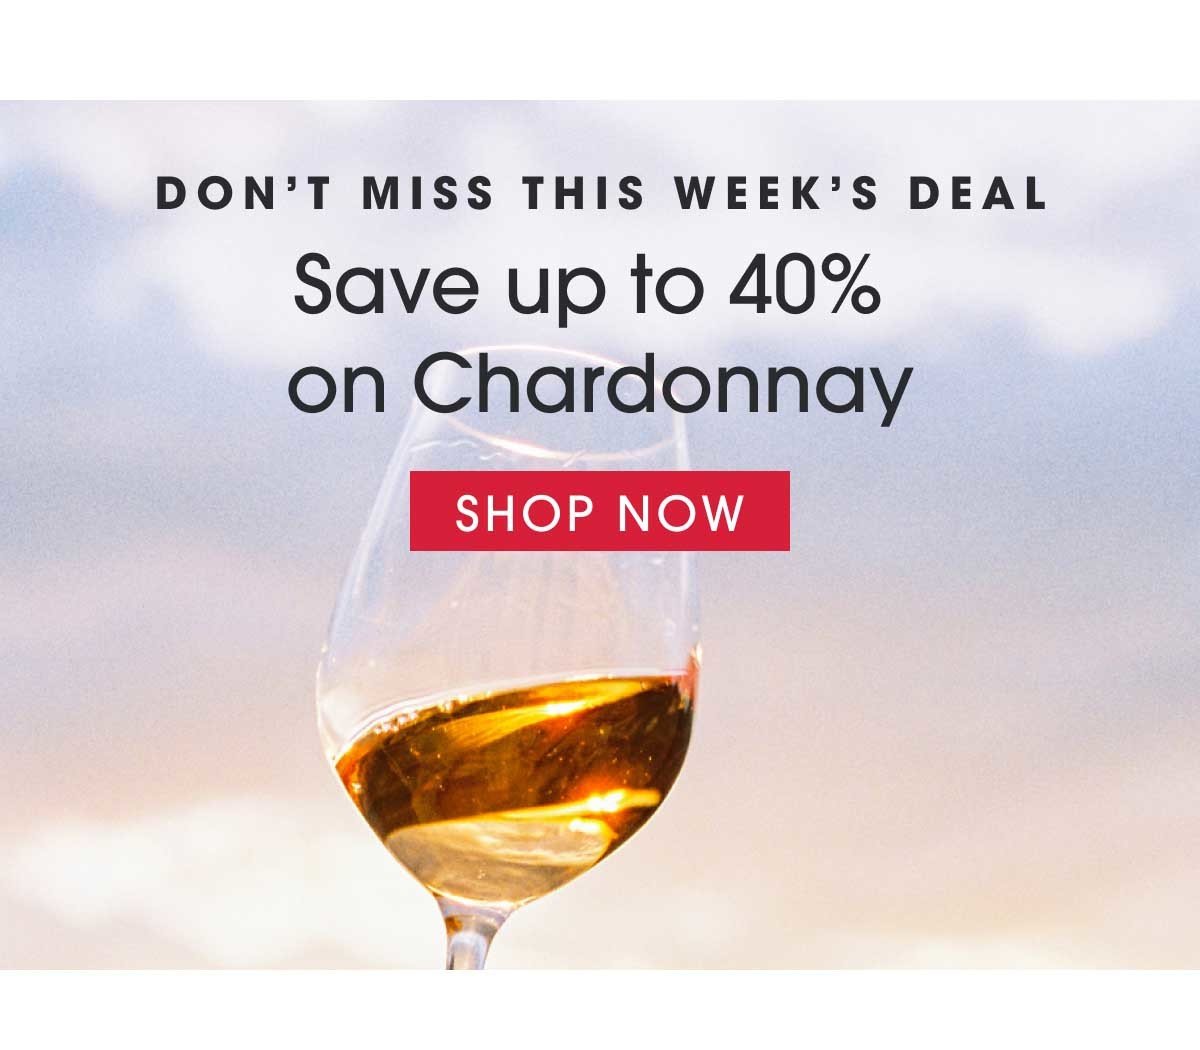 Don't Miss this Week's Savings: Save up to 40% on Chardonnay